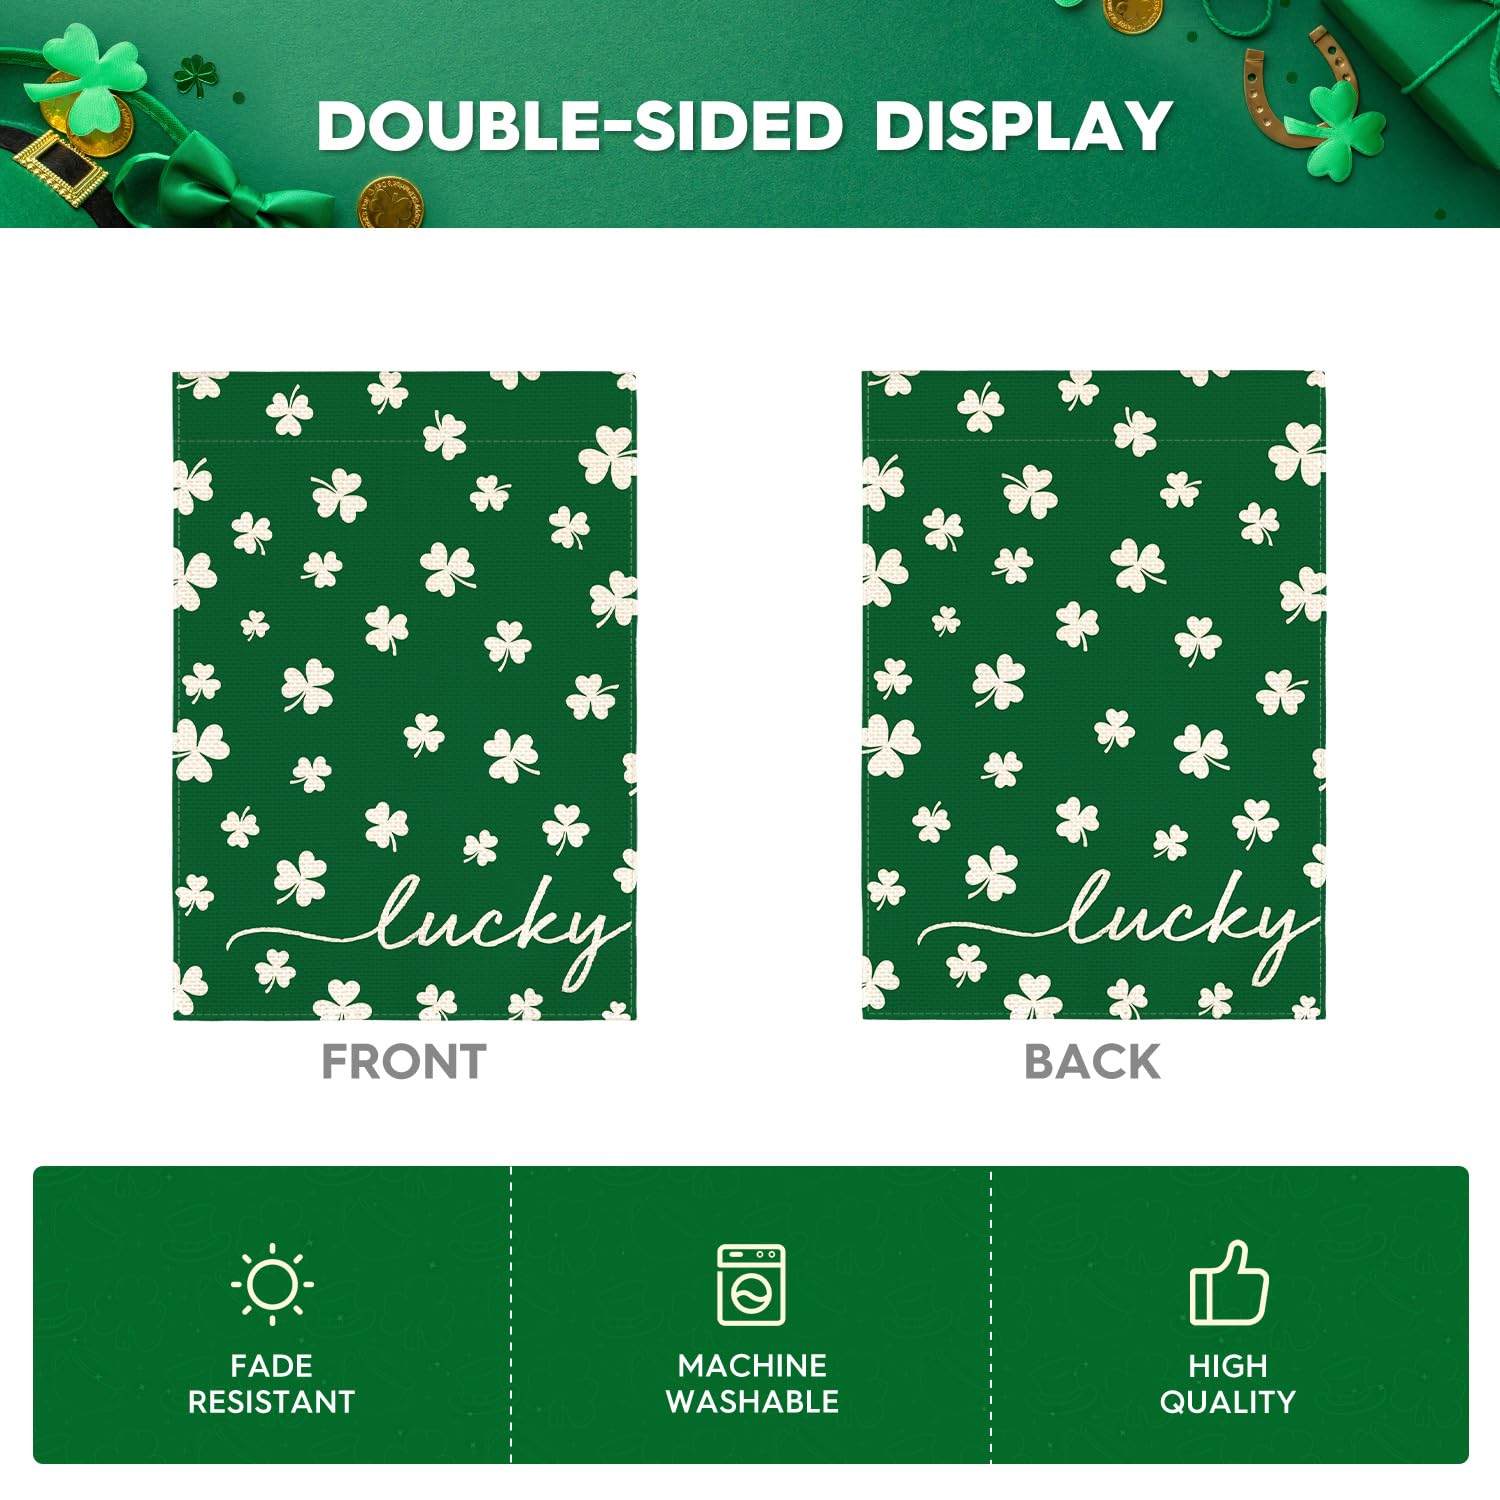 AVOIN colorlife St Patricks Day Lucky Garden Flag 12x18 Inch Double Sided Outside, Floral Small Burlap Shamrocks Clovers Yard Outdoor Decoration